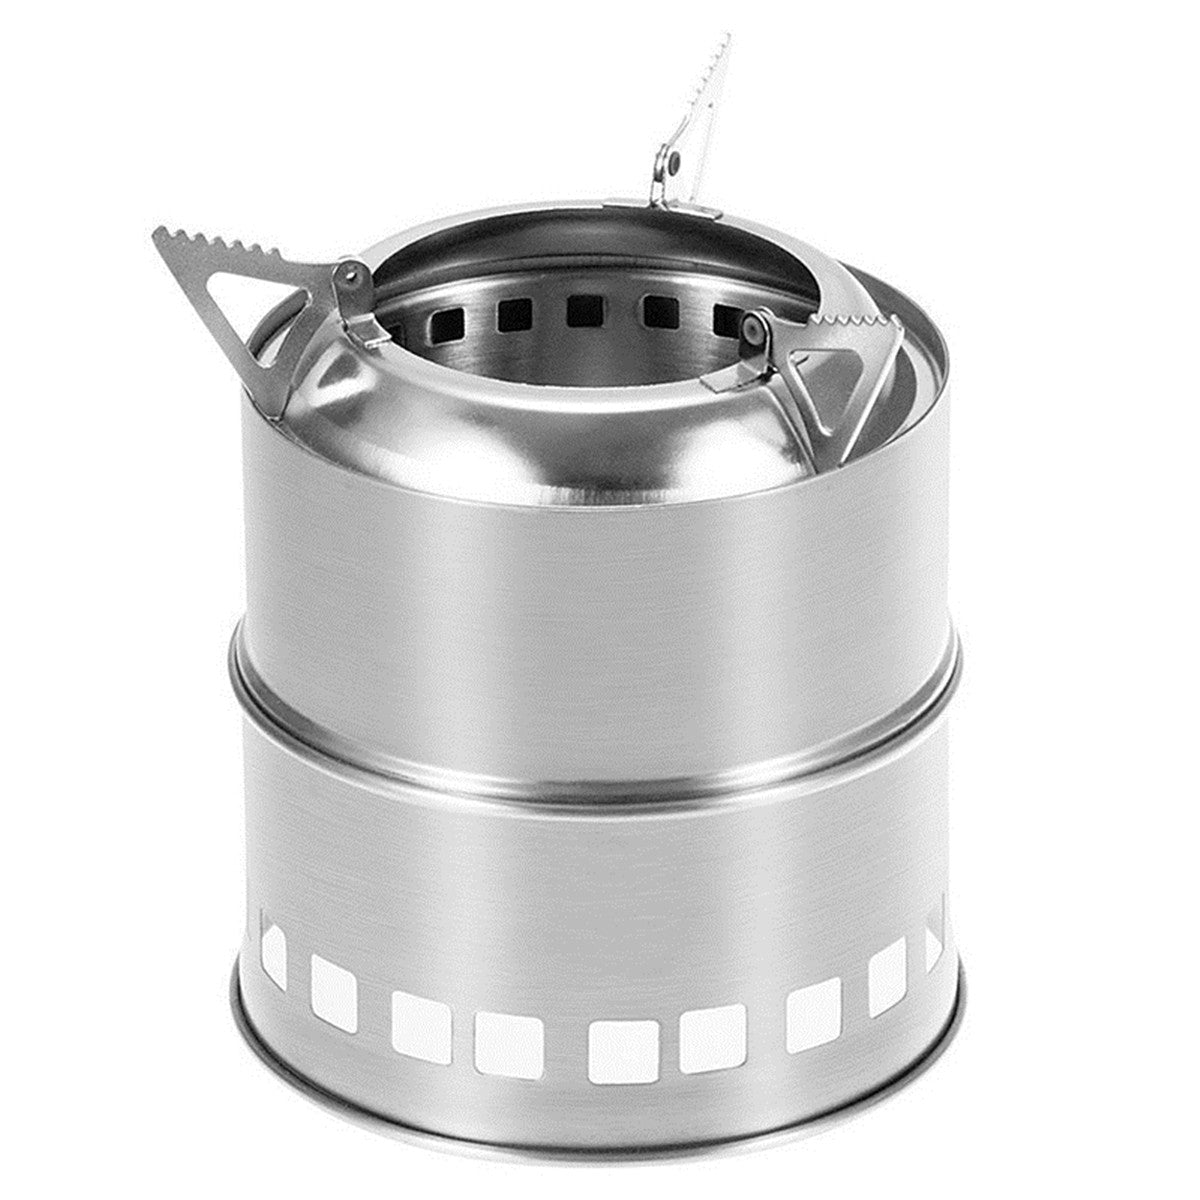 Firefury — Stainless Steel Camping Stove